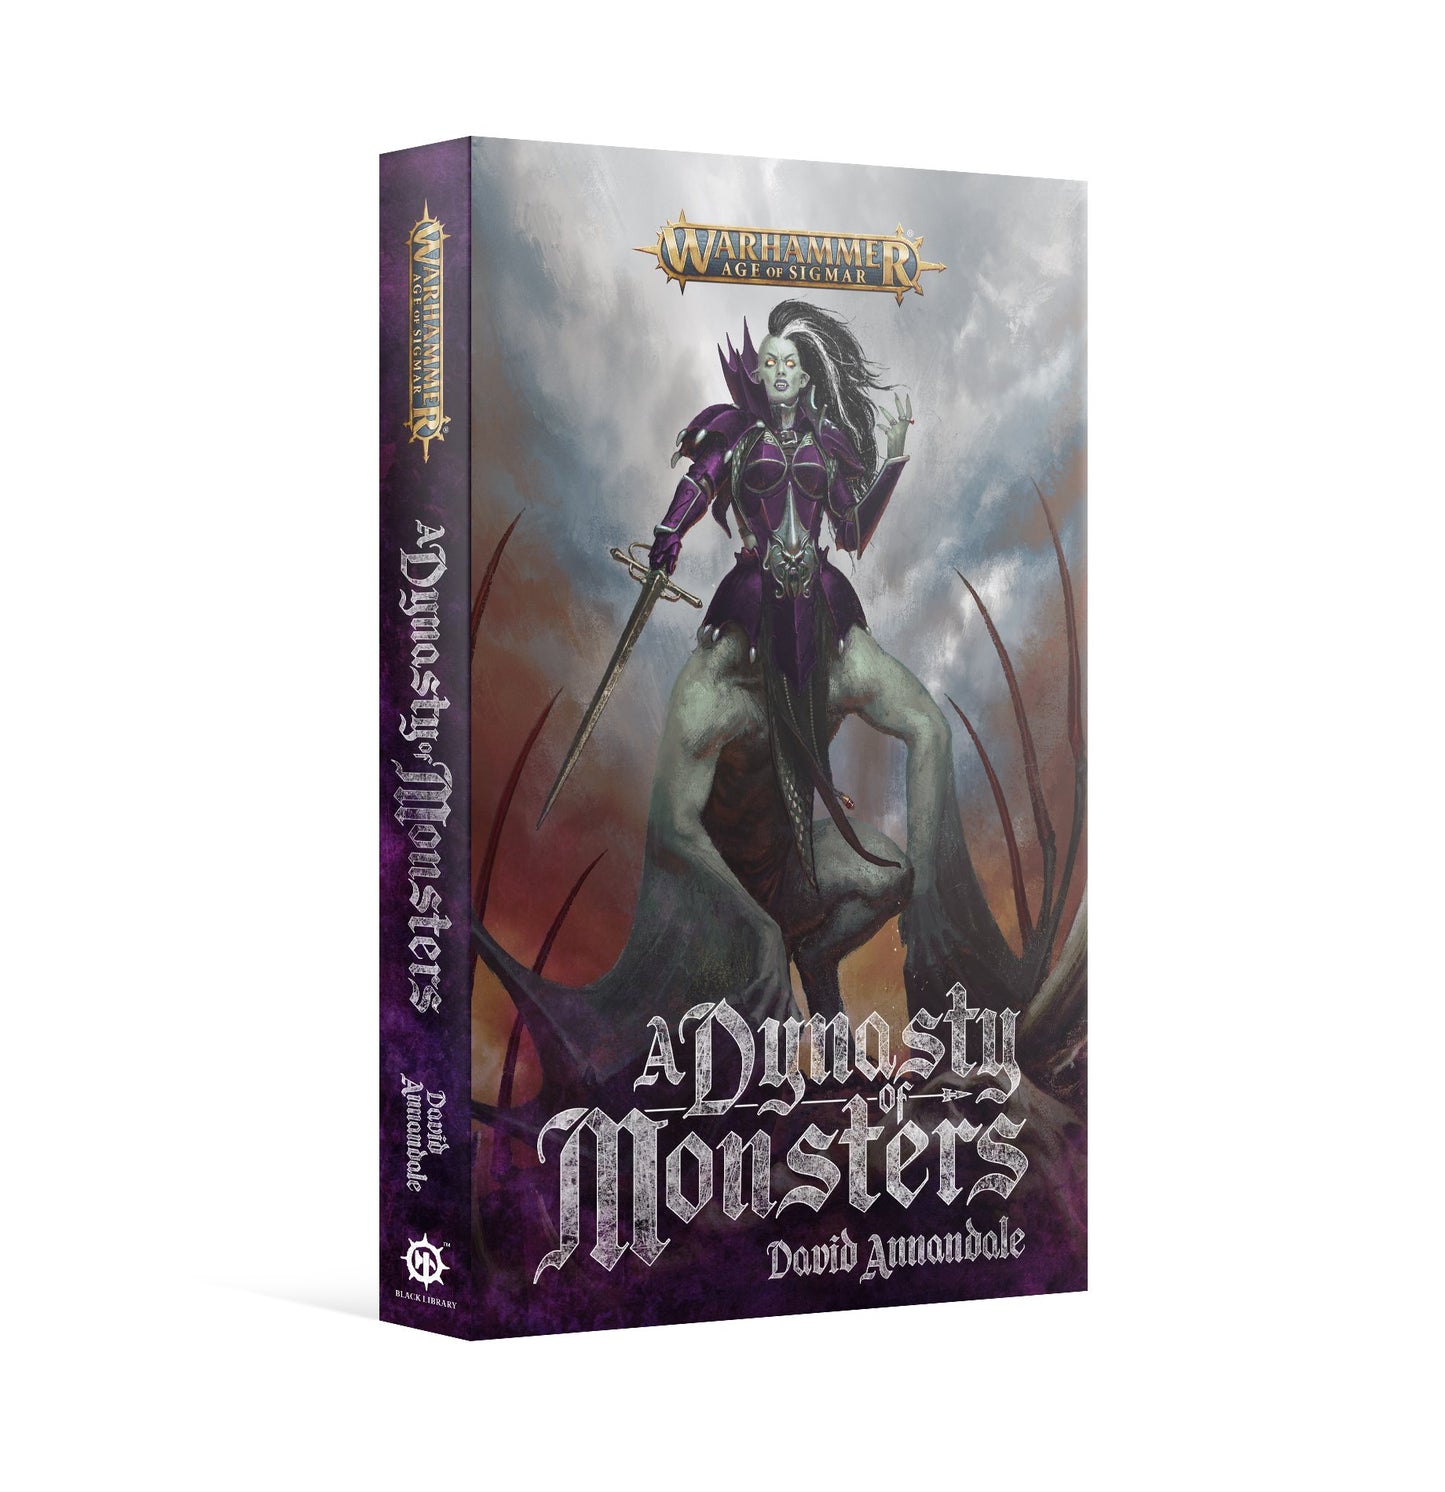 LAST ONE - A Dynasty of Monsters (Paperback)